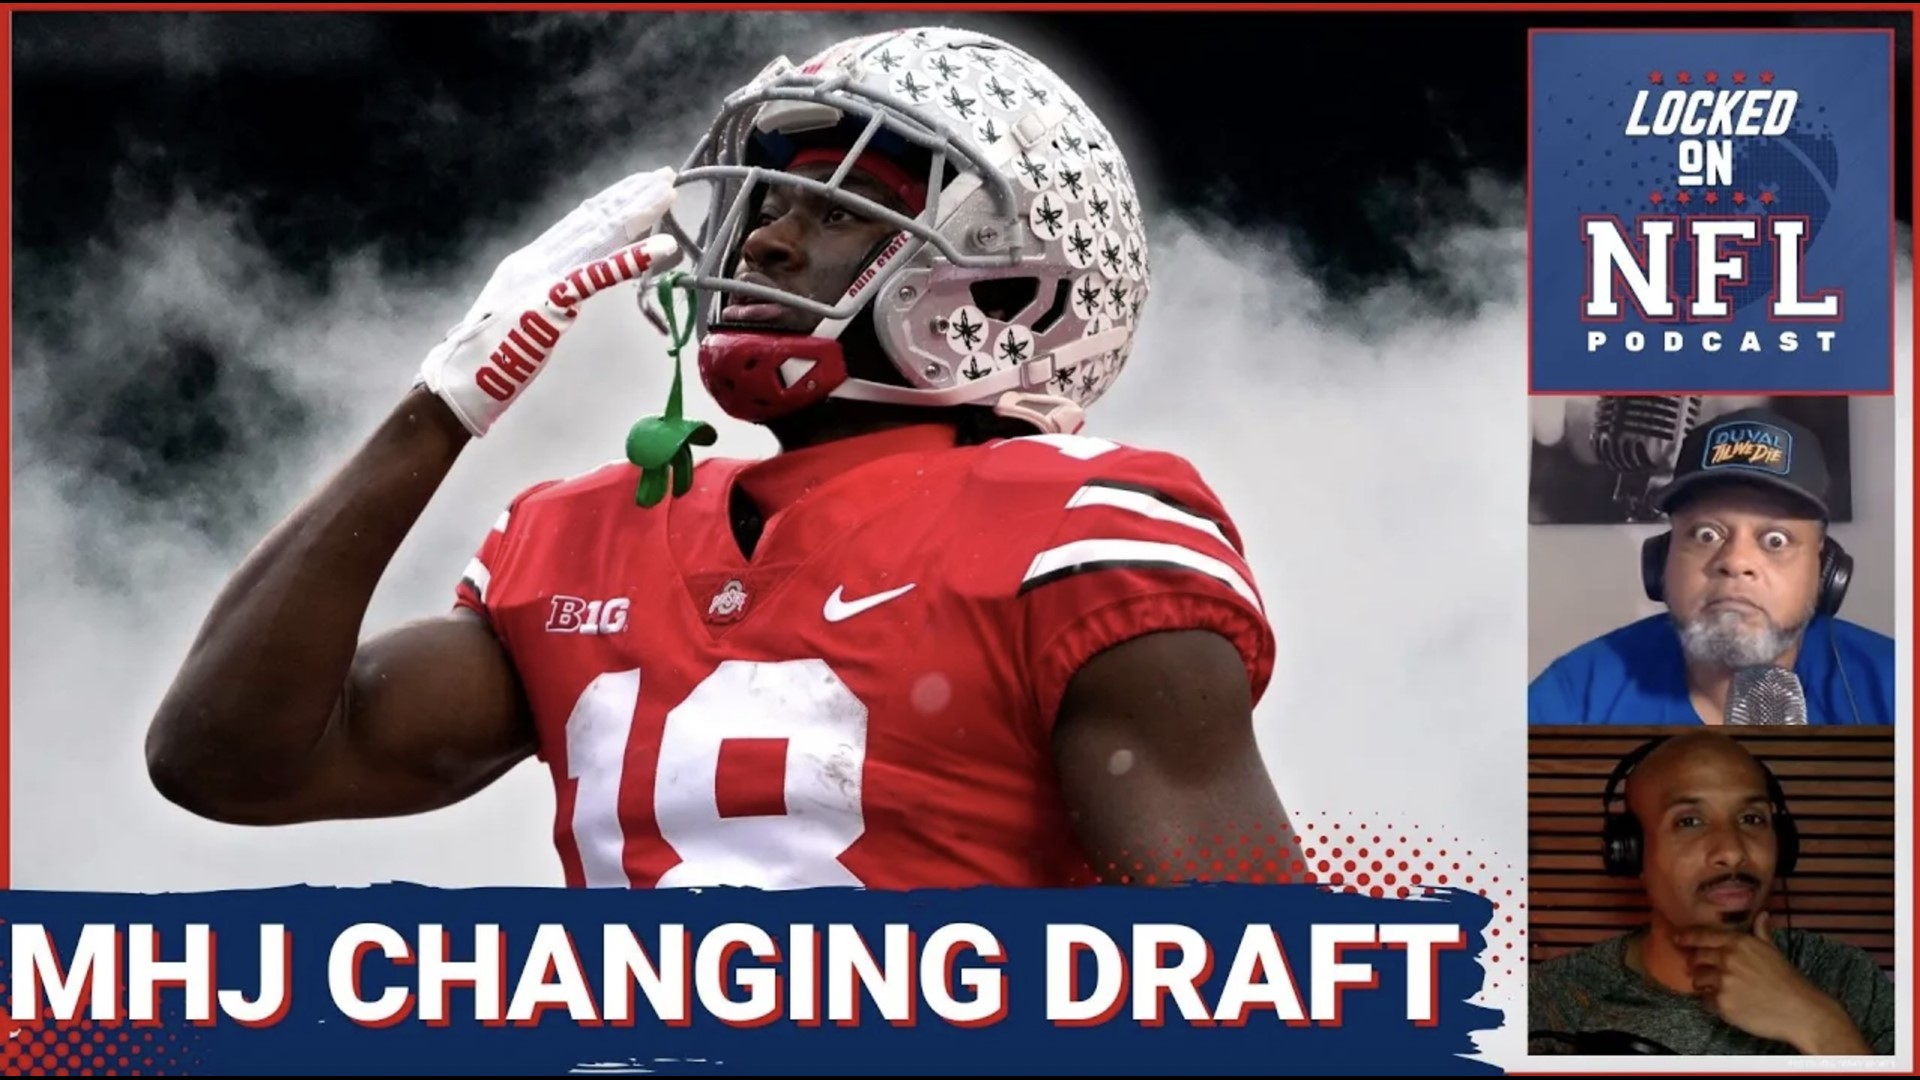 Marvin Harrison Jr. did not participate at the NFL combine nor at the Ohio State pro date. And he didn't have to. Will he set the tone for future top prospects?